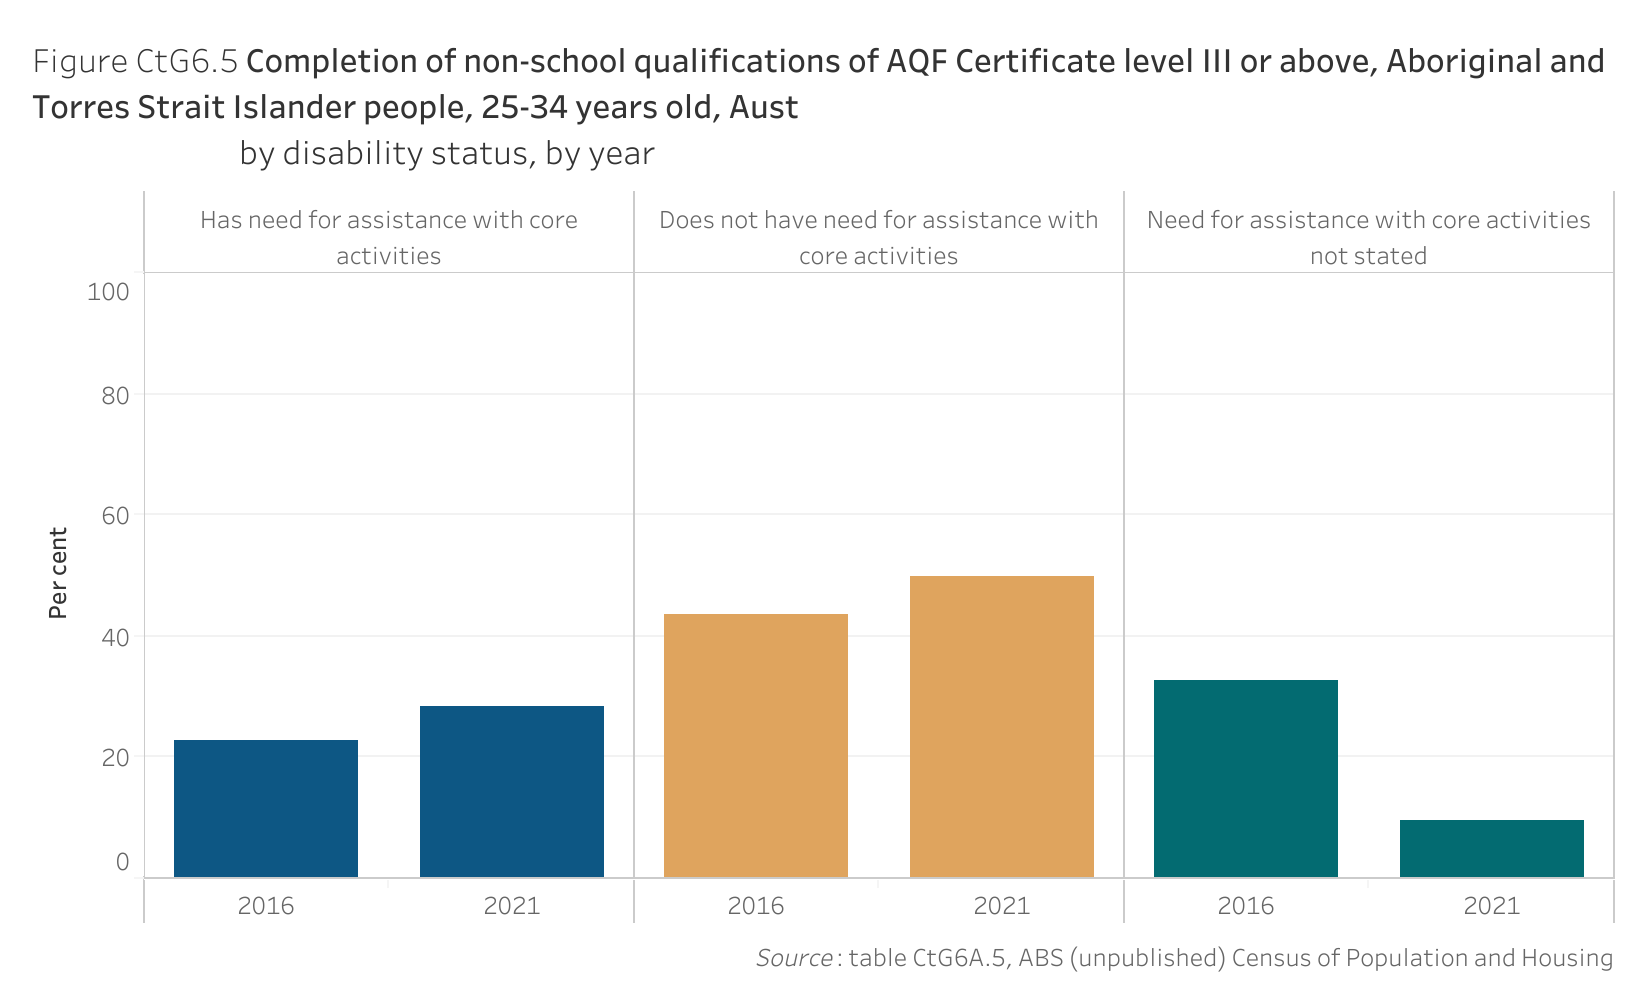 Figure CtG6.5 shows the completion of non-school qualifications of Australian Qualifications Framework Certificate level III or above, Aboriginal and Torres Strait Islander people, 25-34 years old, Australia, by disability status, by year. More details can be found within the text near this image.